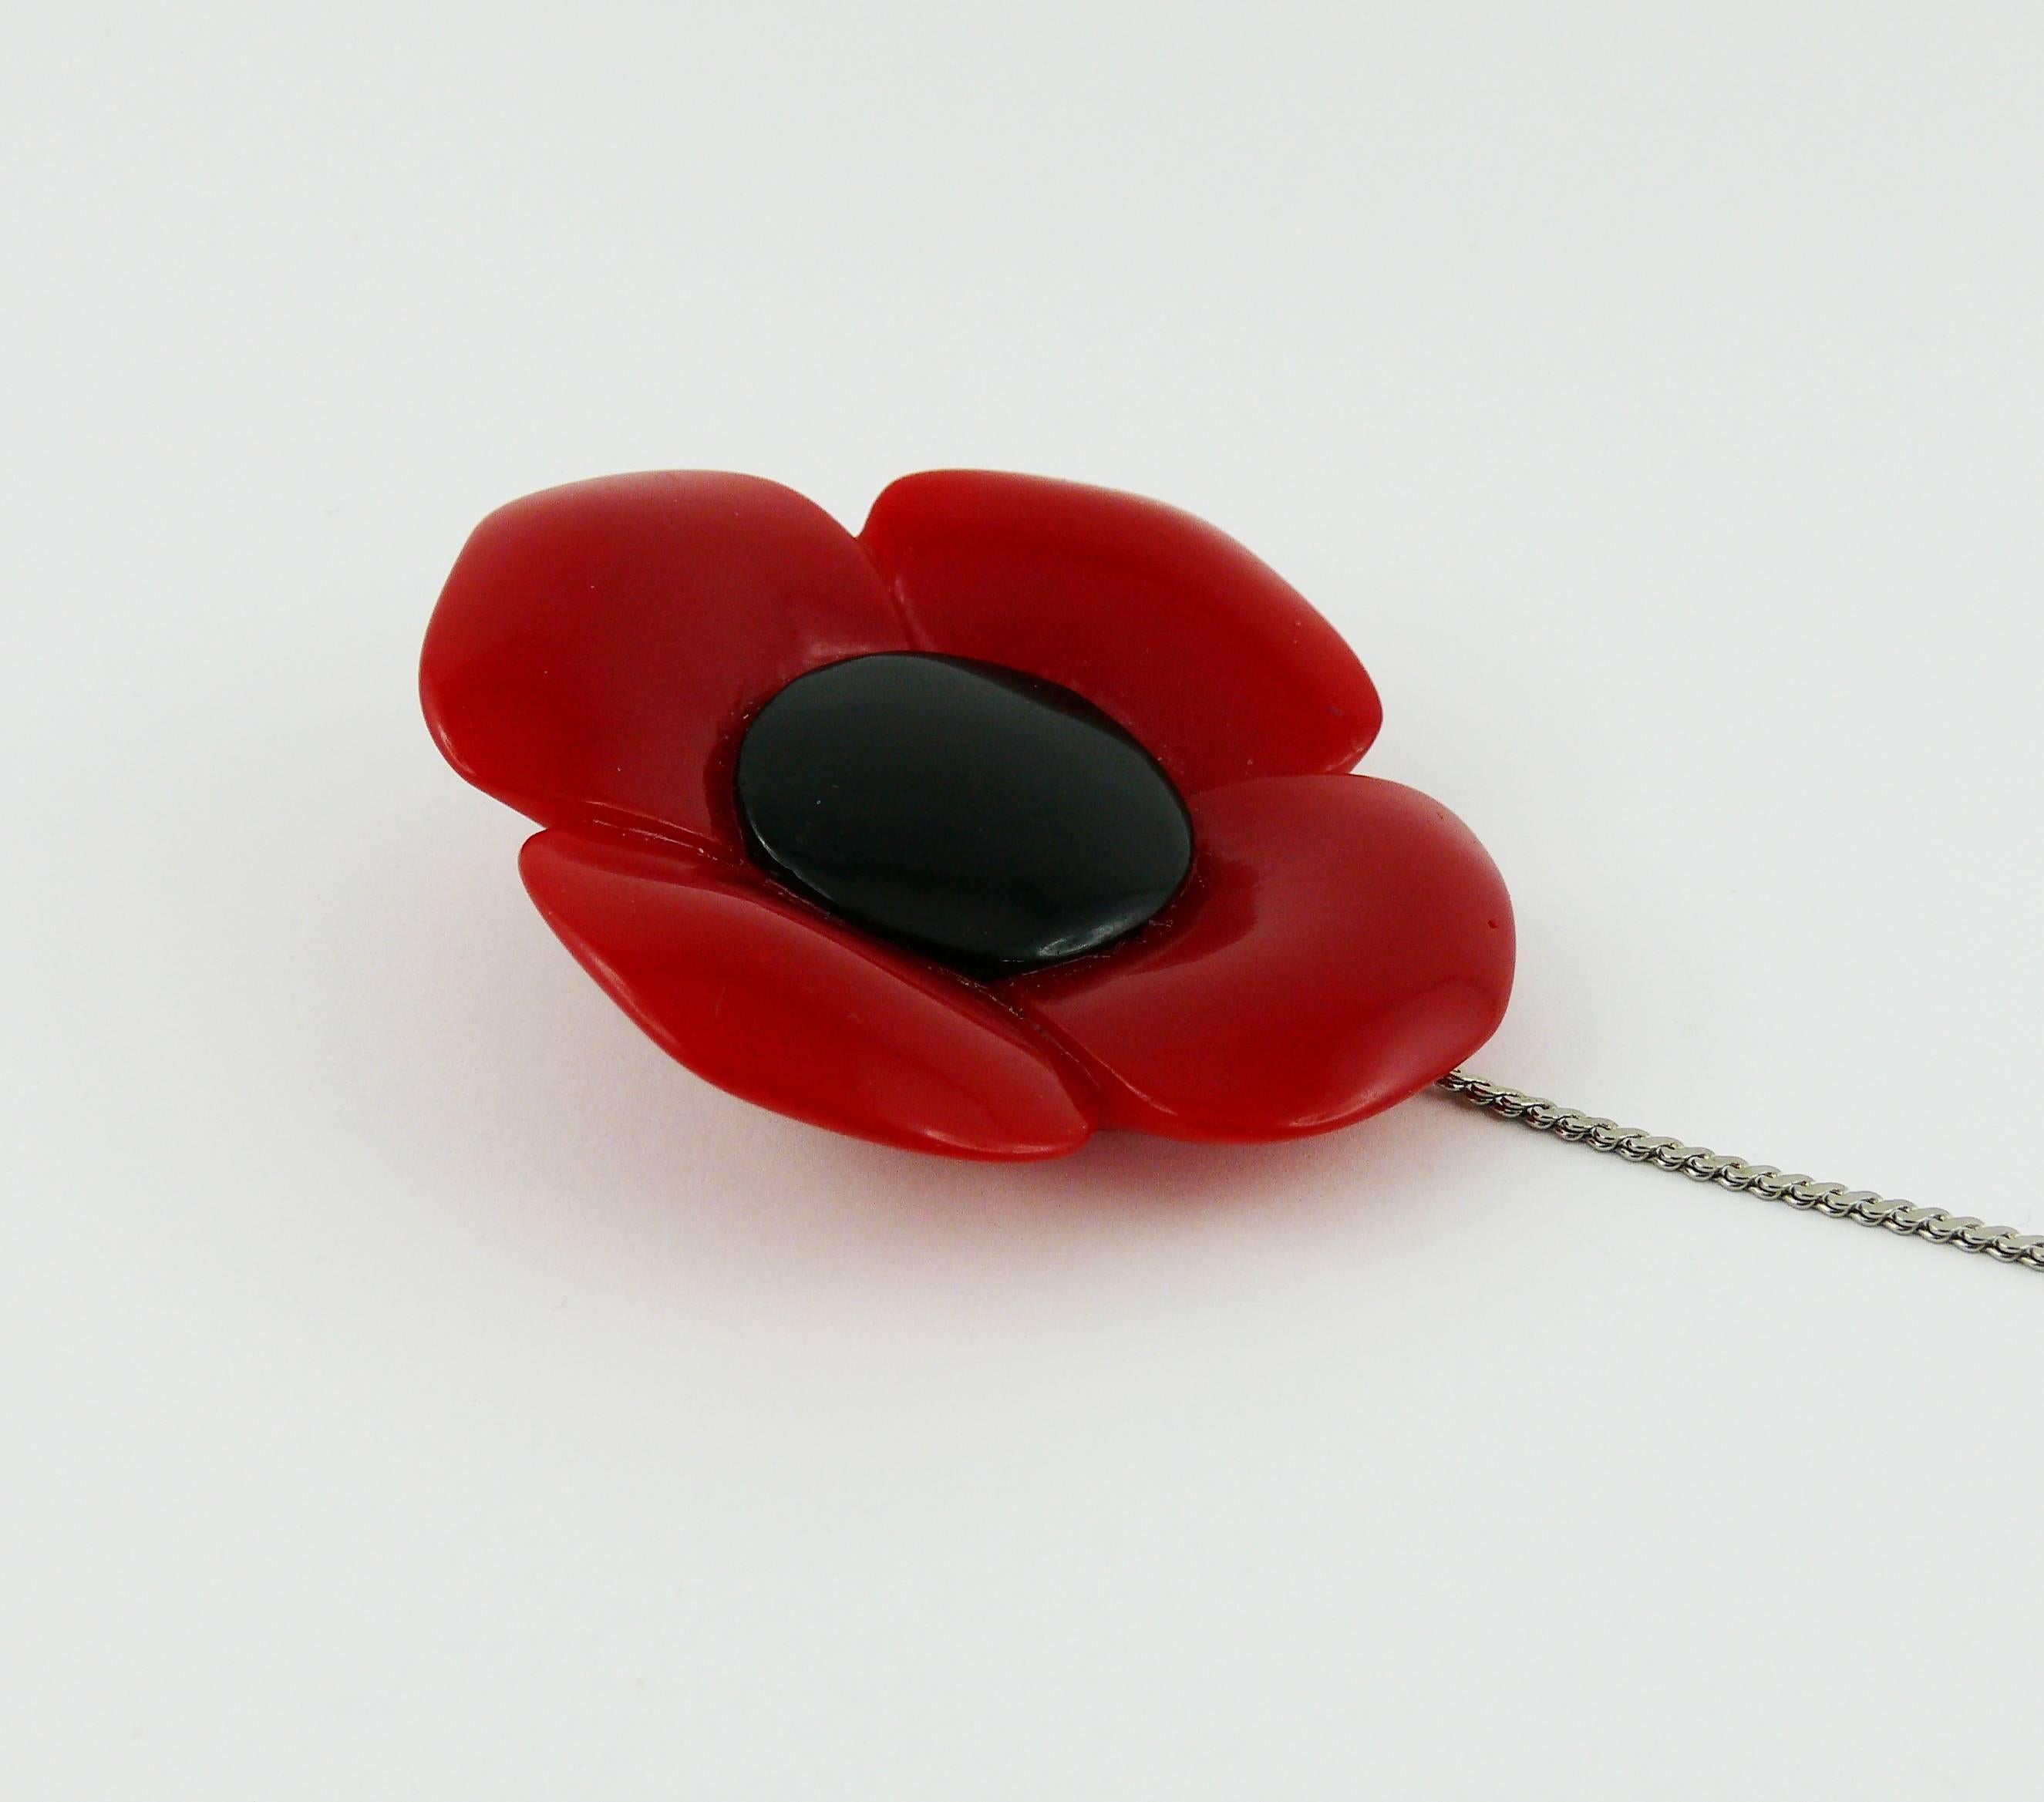 PIERRE CARDIN vintage resin poppy brooch.

Marked PIERRE CARDIN Paris.

JEWELRY CONDITION CHART
- New or never worn : item is in pristine condition with no noticeable imperfections
- Excellent : item has been used and may have not more than